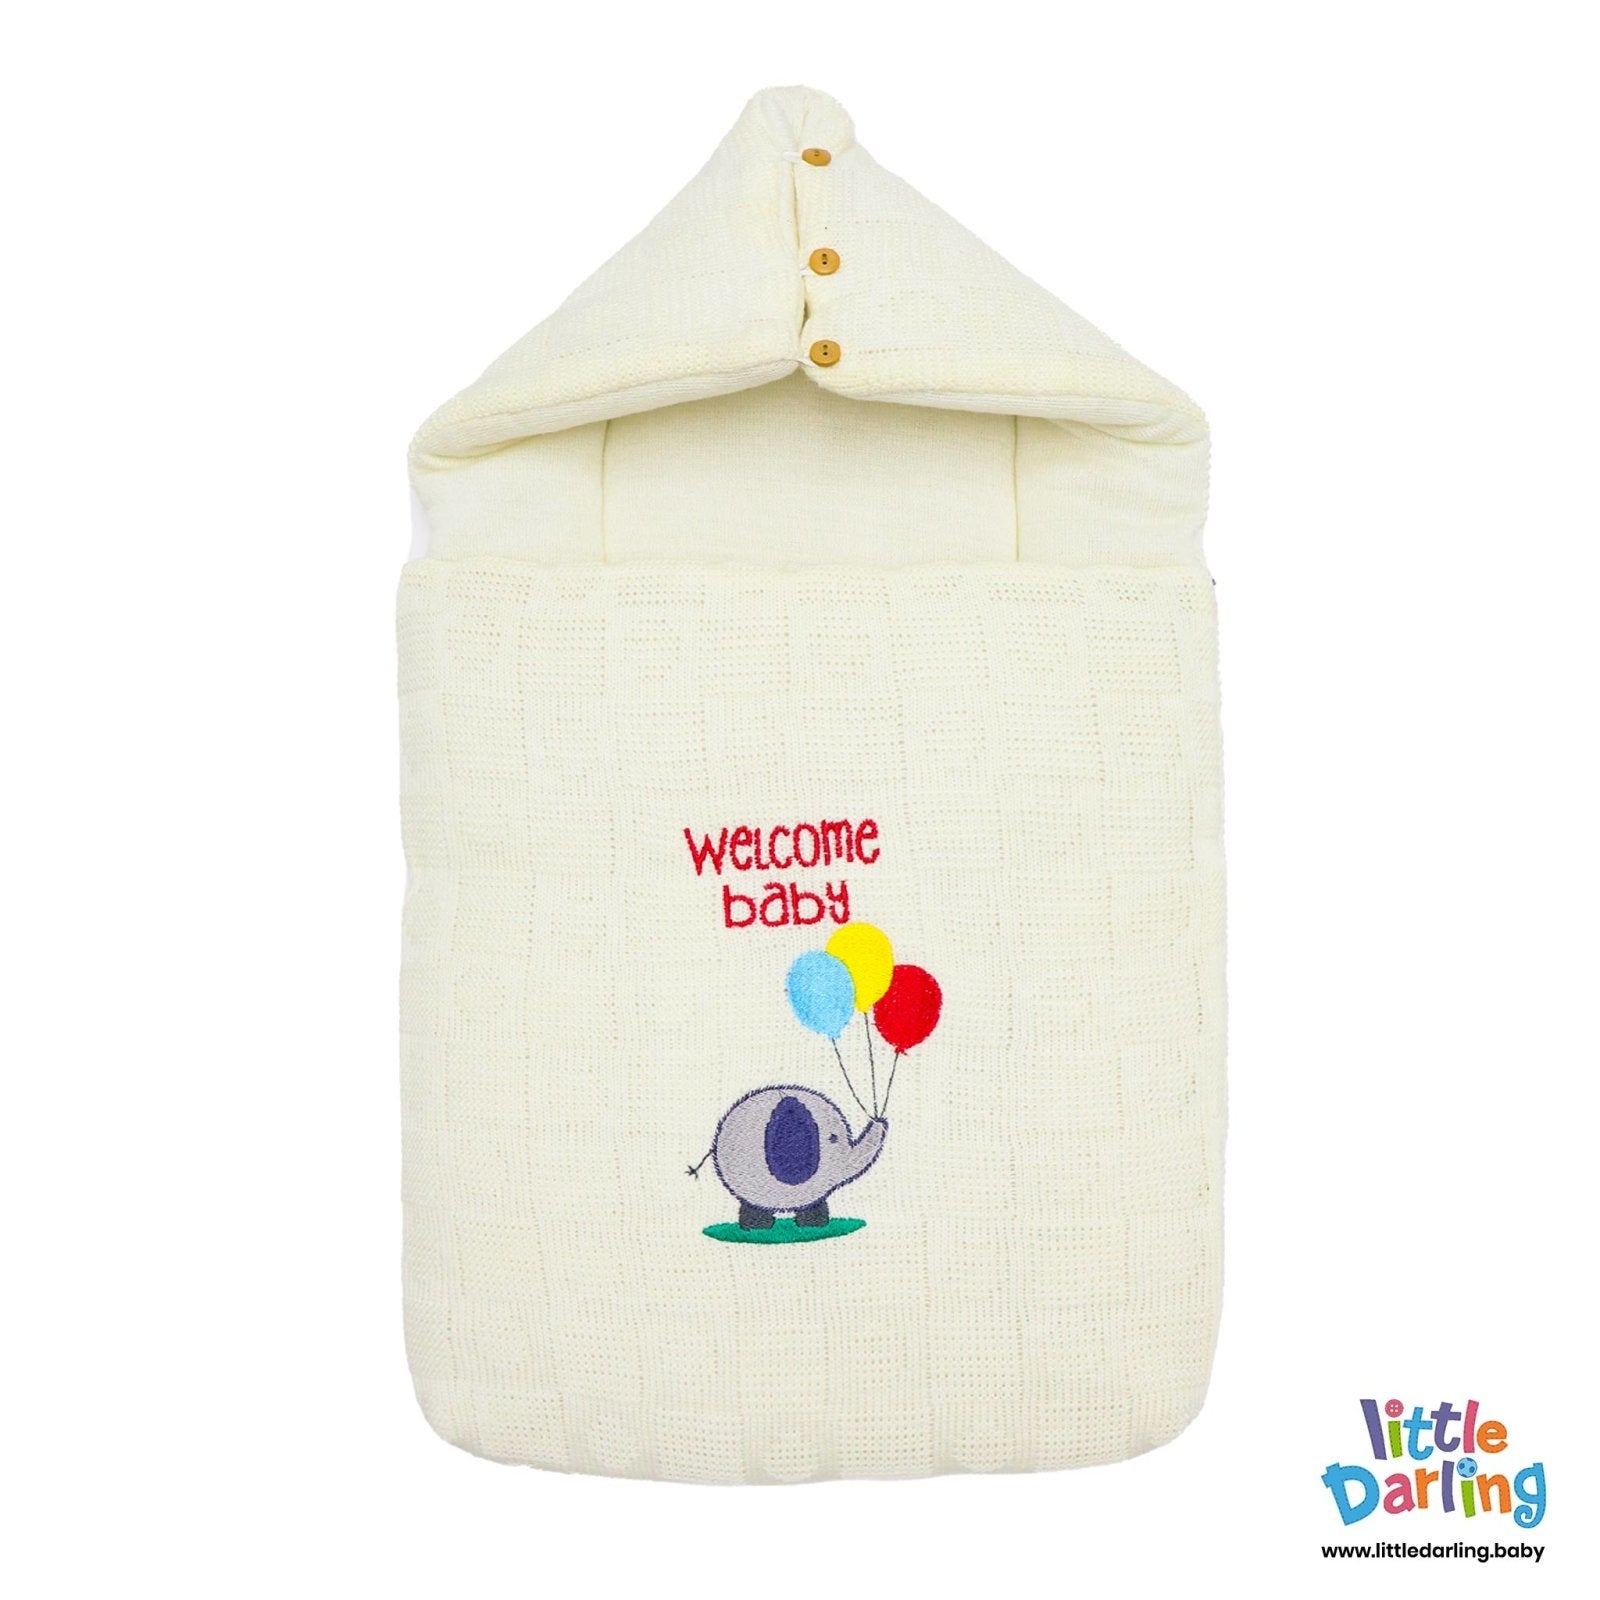 Hooded Baby Carrynest With Pillow Welcome Baby by Little Darling